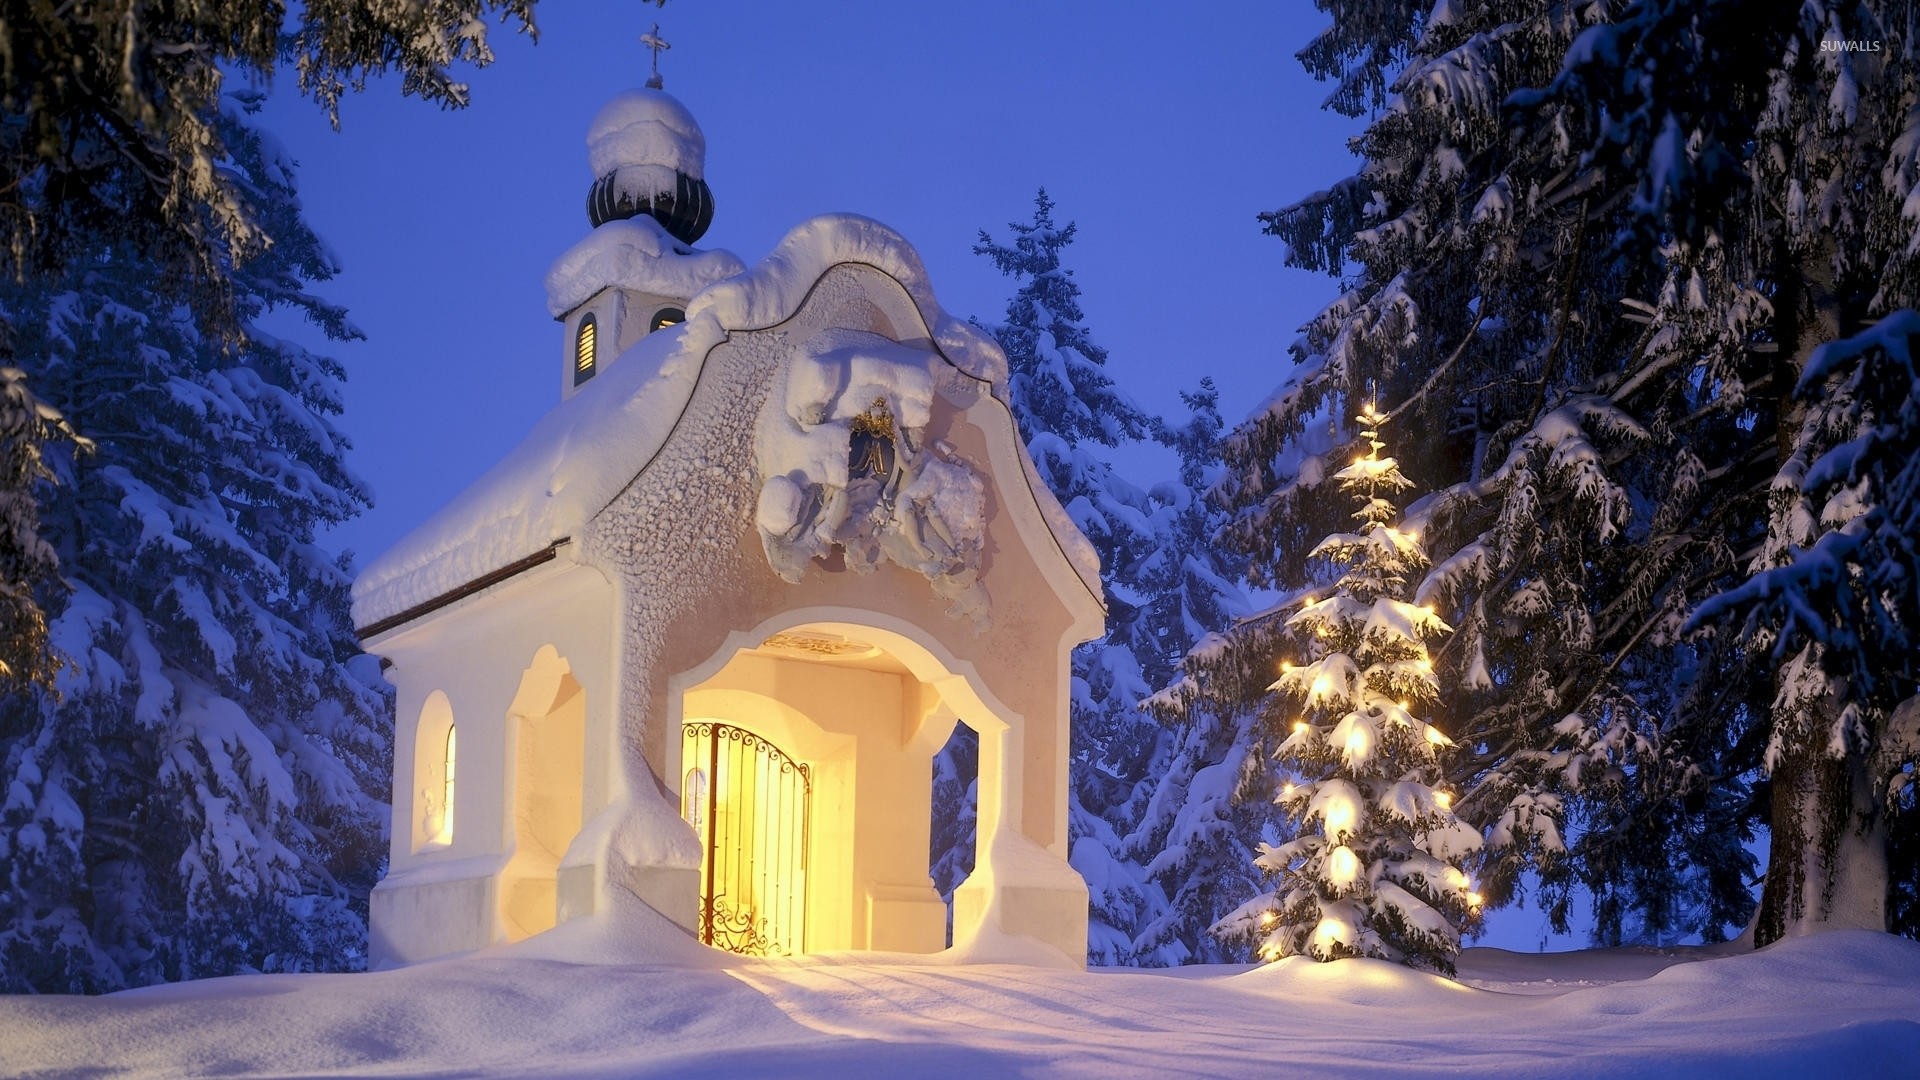 Small church in the snowy forest wallpaper jpg